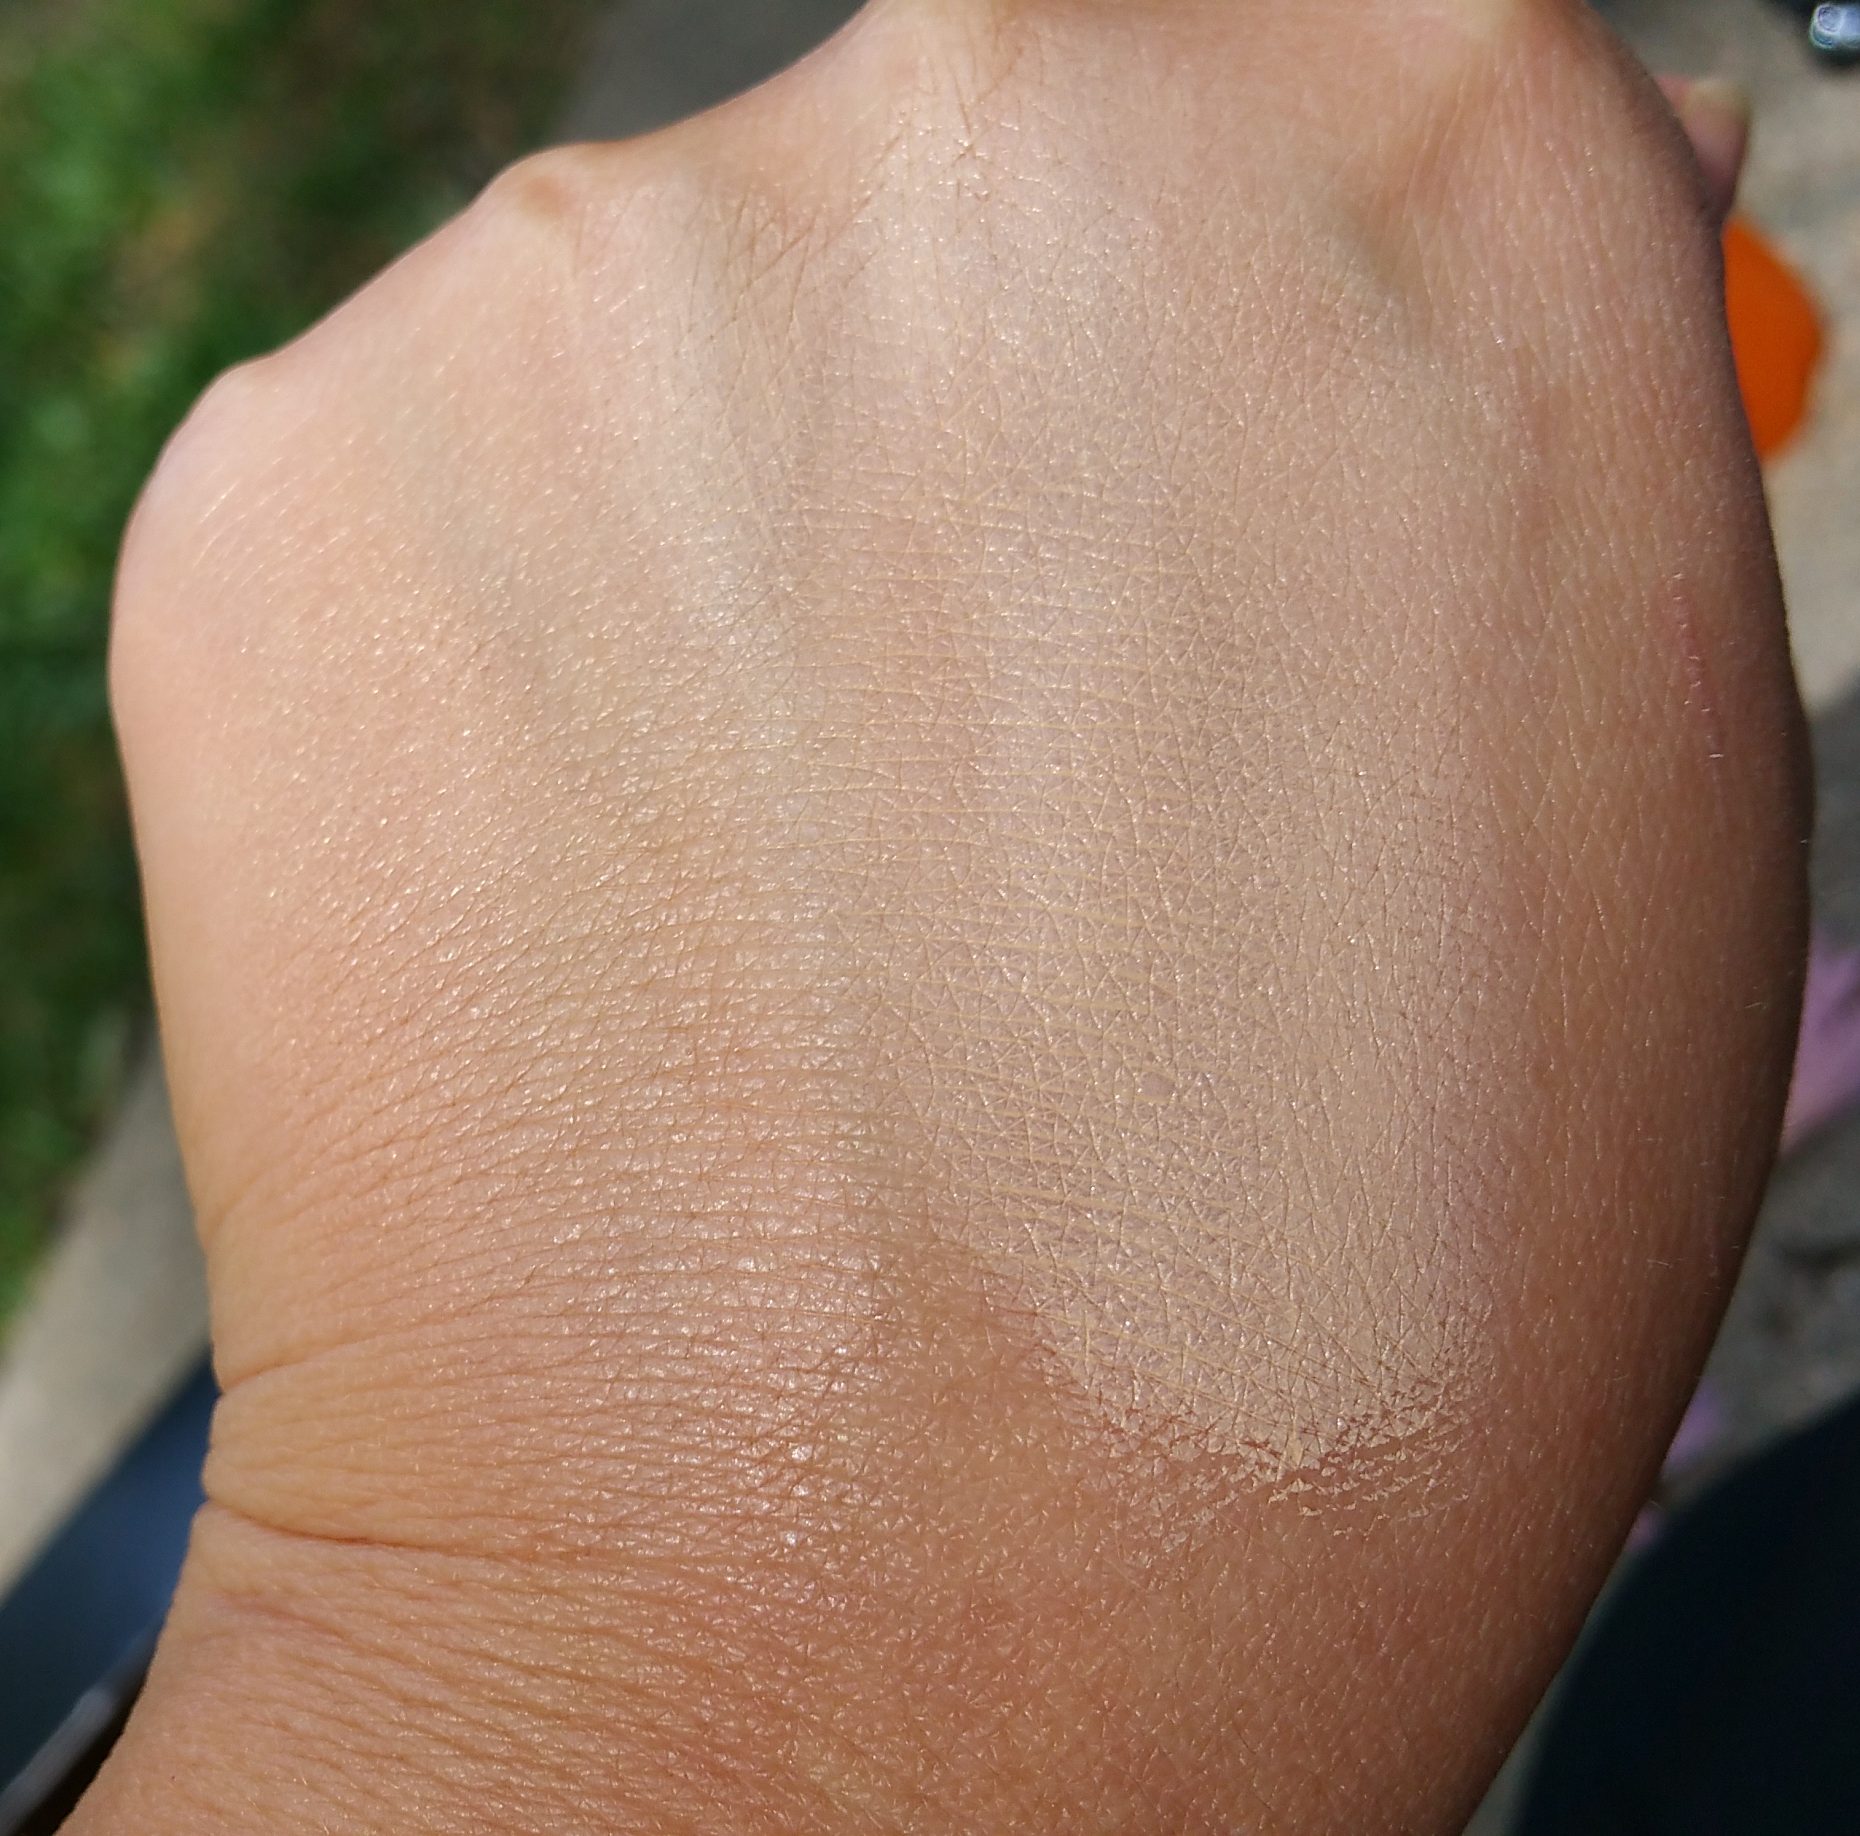 Kat Von D Beauty Lock-It Creme Concealers, in shades L13 (Cool) and L7 (Warm), left to right, swatched and blended out.